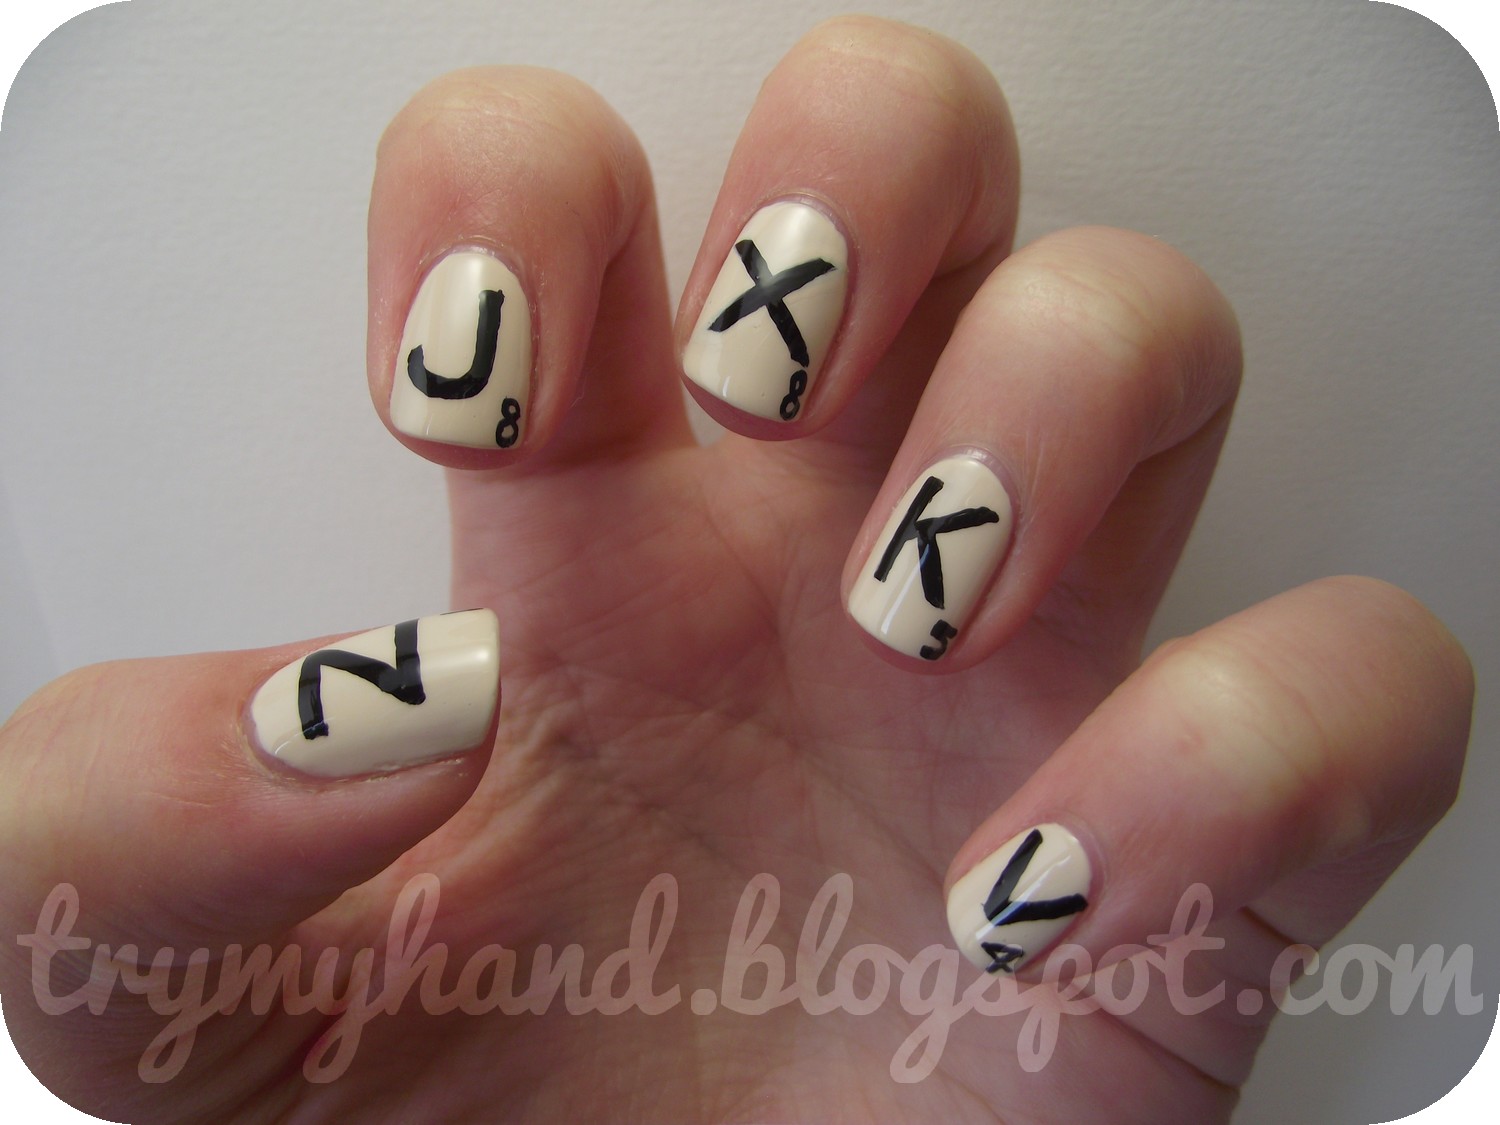 3. Lettering Nail Art Decals - wide 6